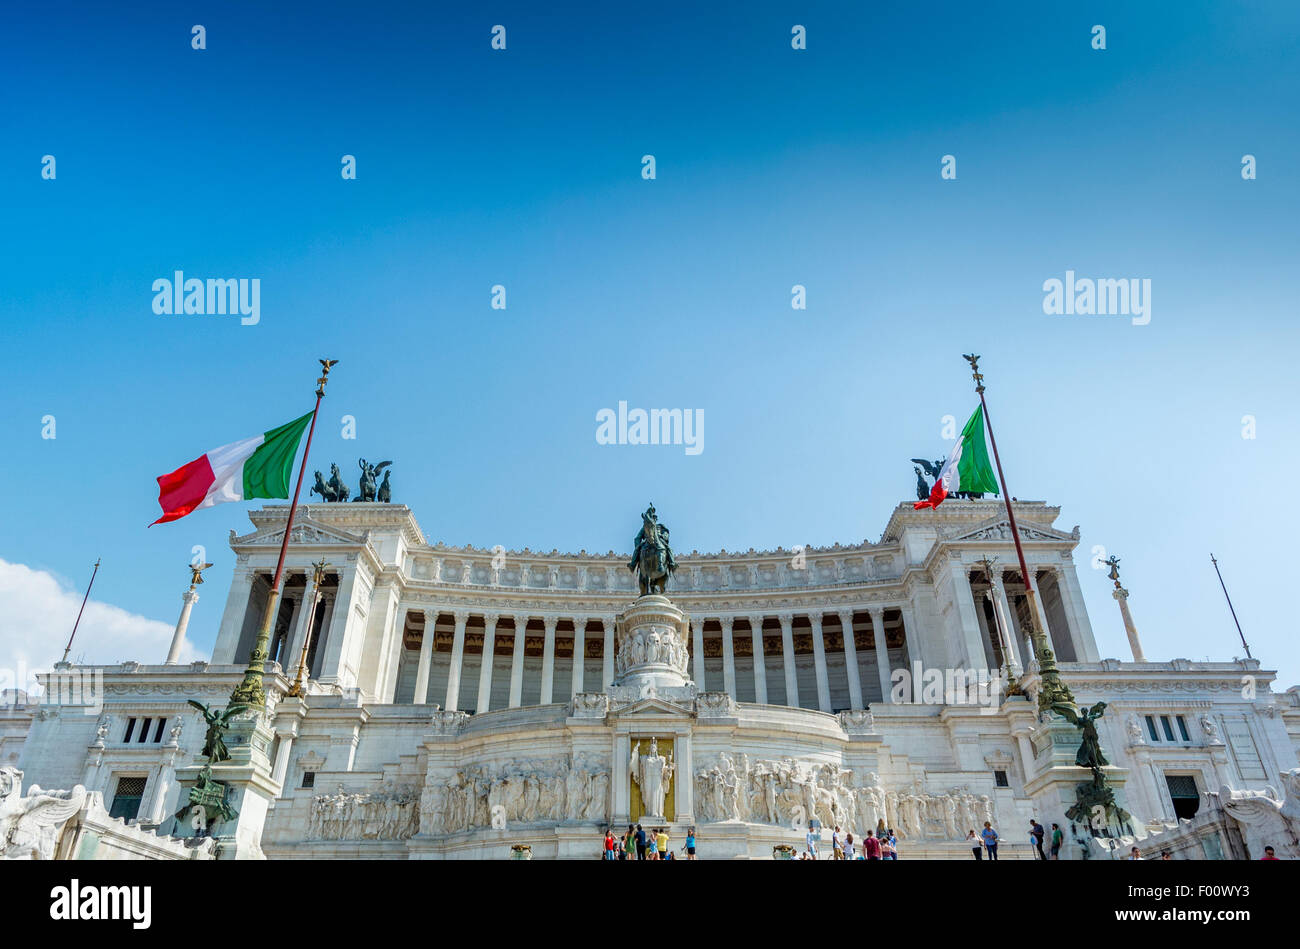 Steps leading to the Altare della Patria or National Monument to Victor Emmanuel II. Rome, Italy. Stock Photo